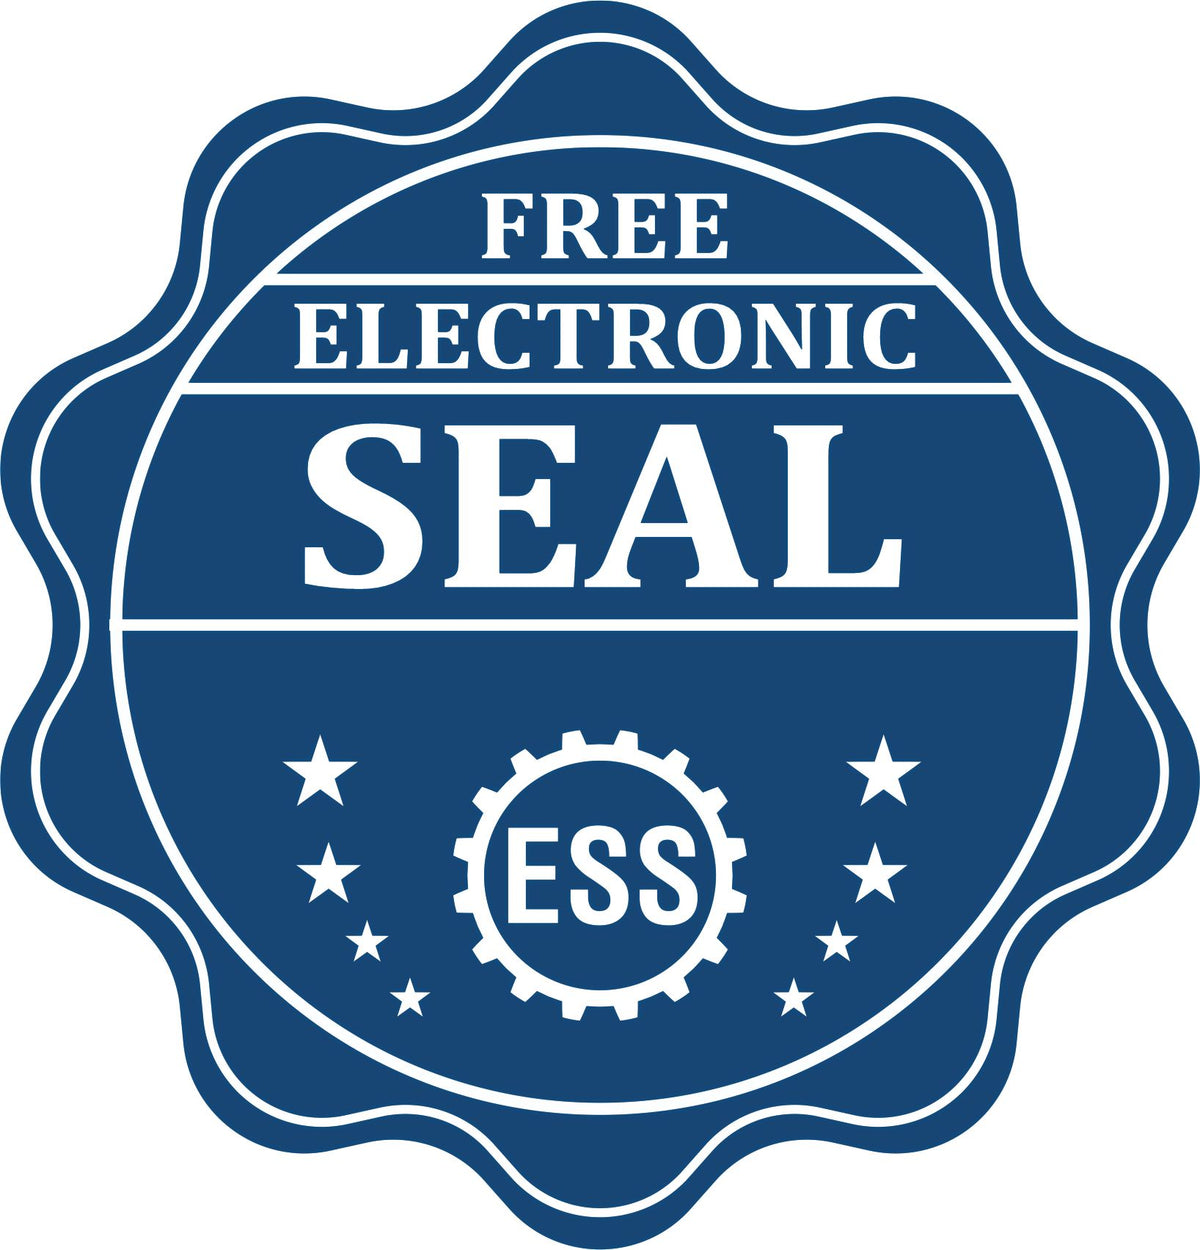 A badge showing a free electronic seal for the State of Idaho Extended Long Reach Geologist Seal with stars and the ESS gear on the emblem.